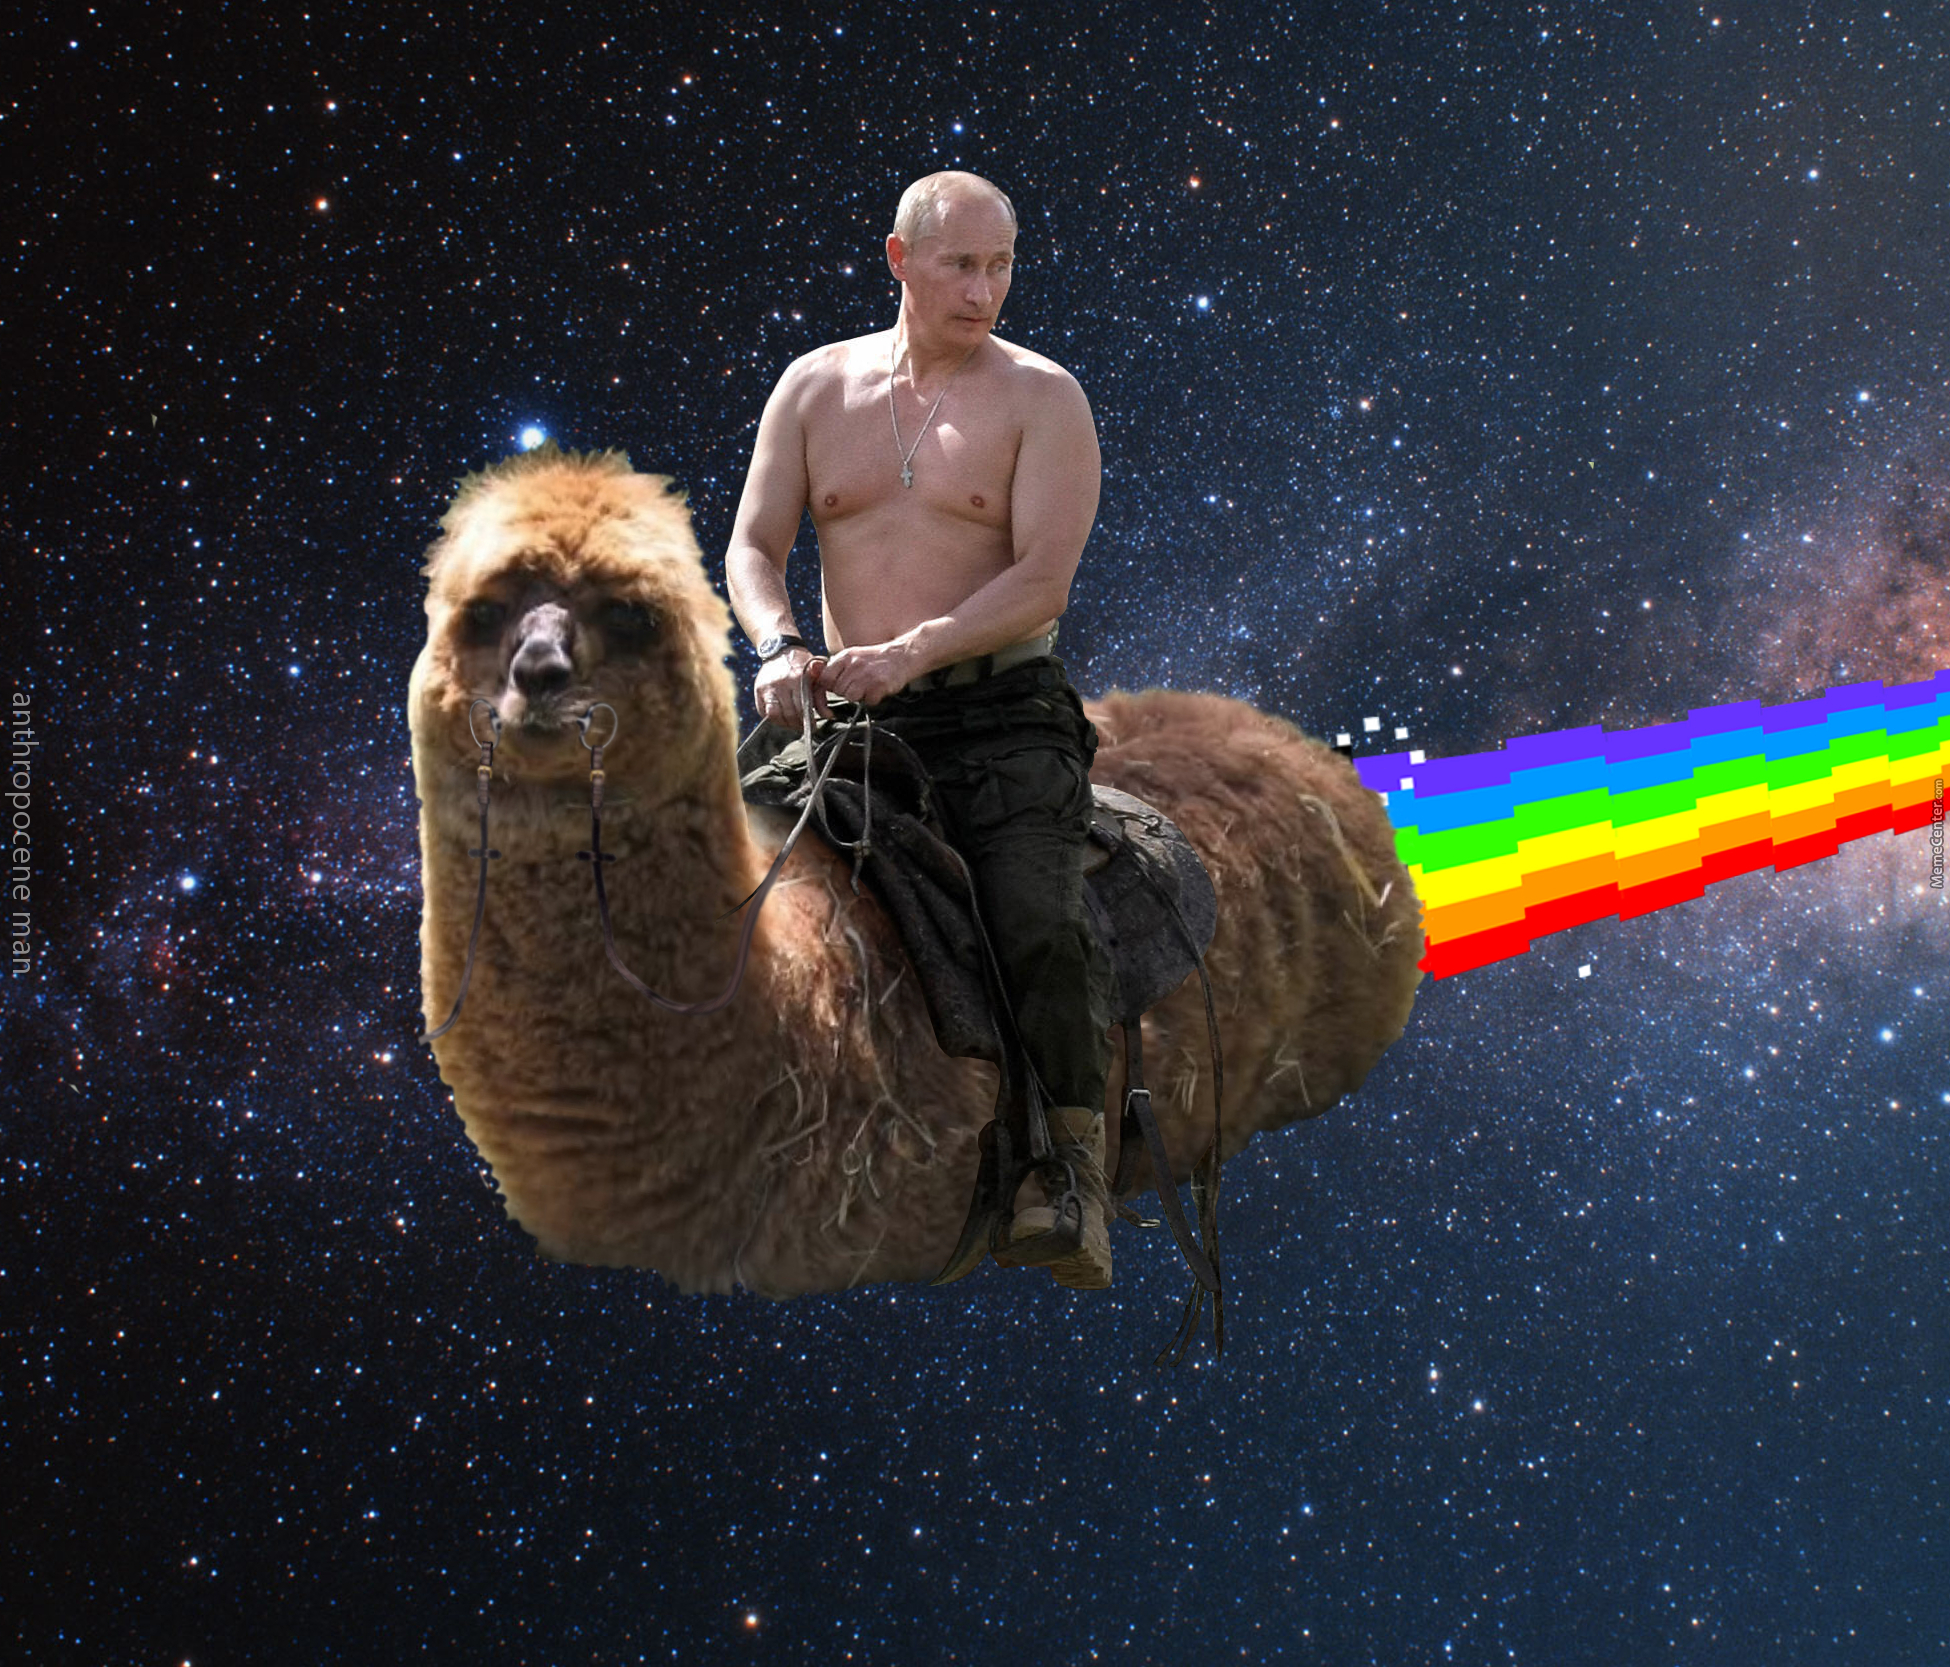 One of the 'Putin Rides' memes.